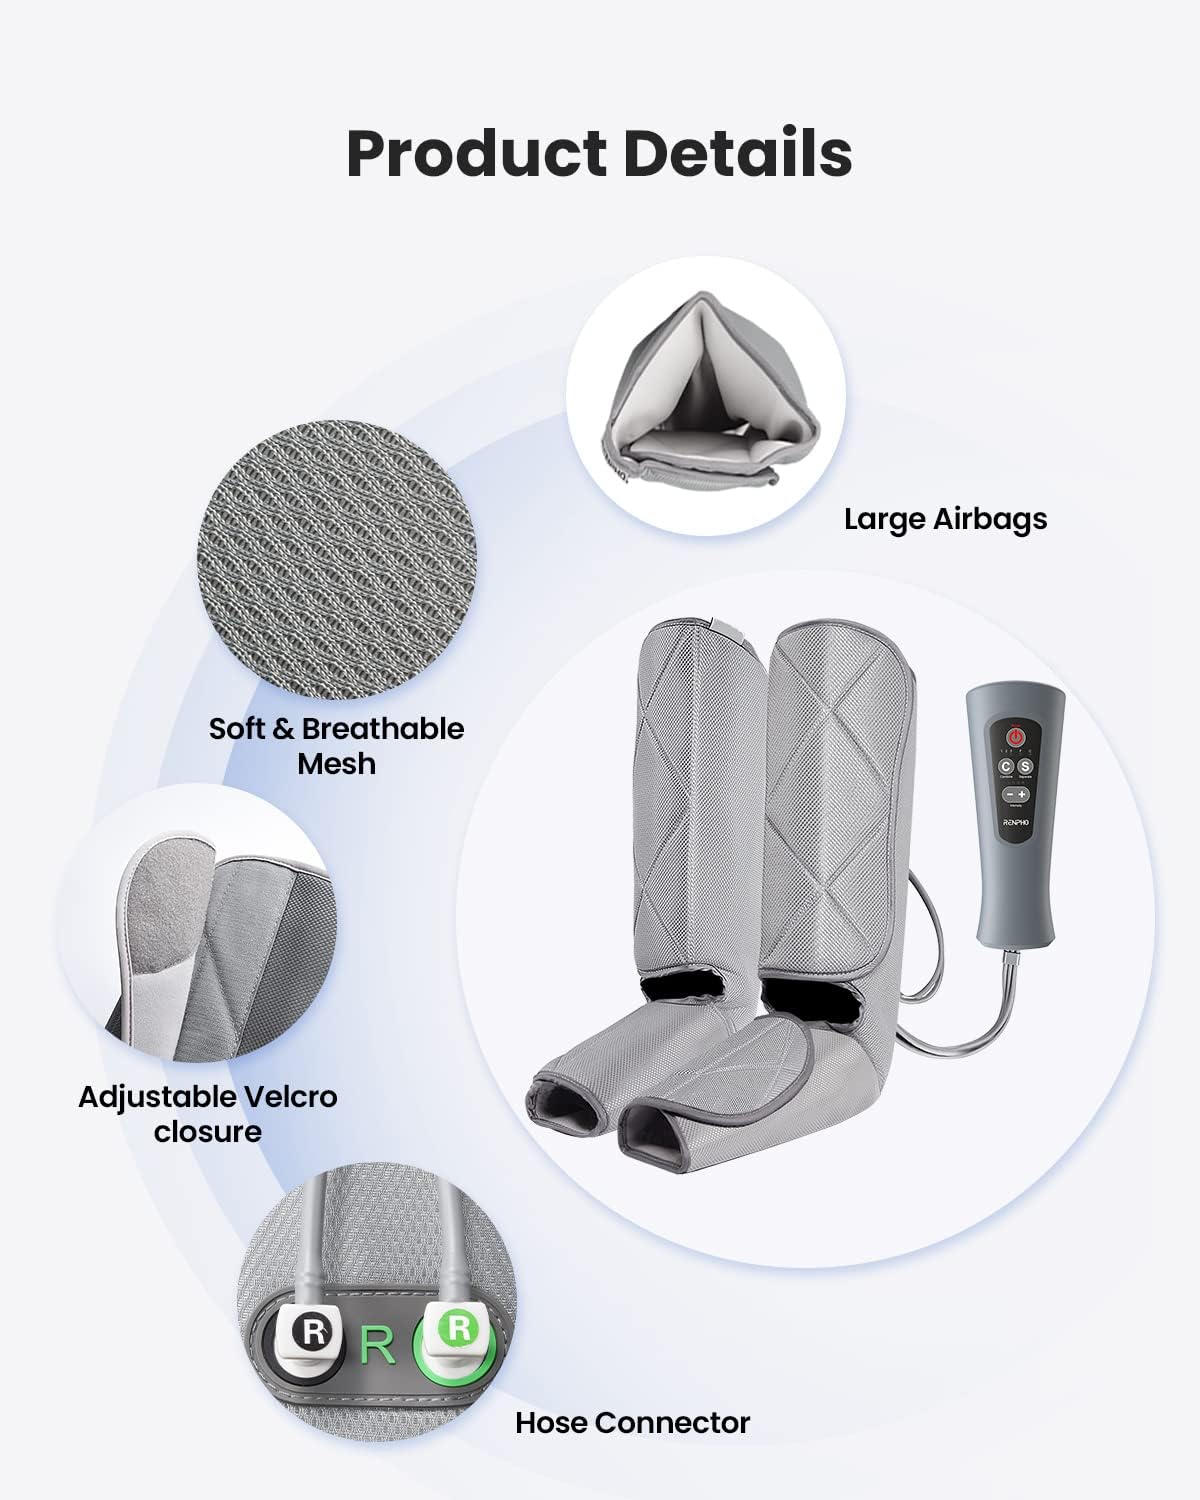 Image of Aeria Elementary Calf and Foot Massager details featuring separate sections. It includes a close-up of soft, breathable mesh, a large airbag, adjustable leg wrap closures, and a hose connector by Renpho EU.